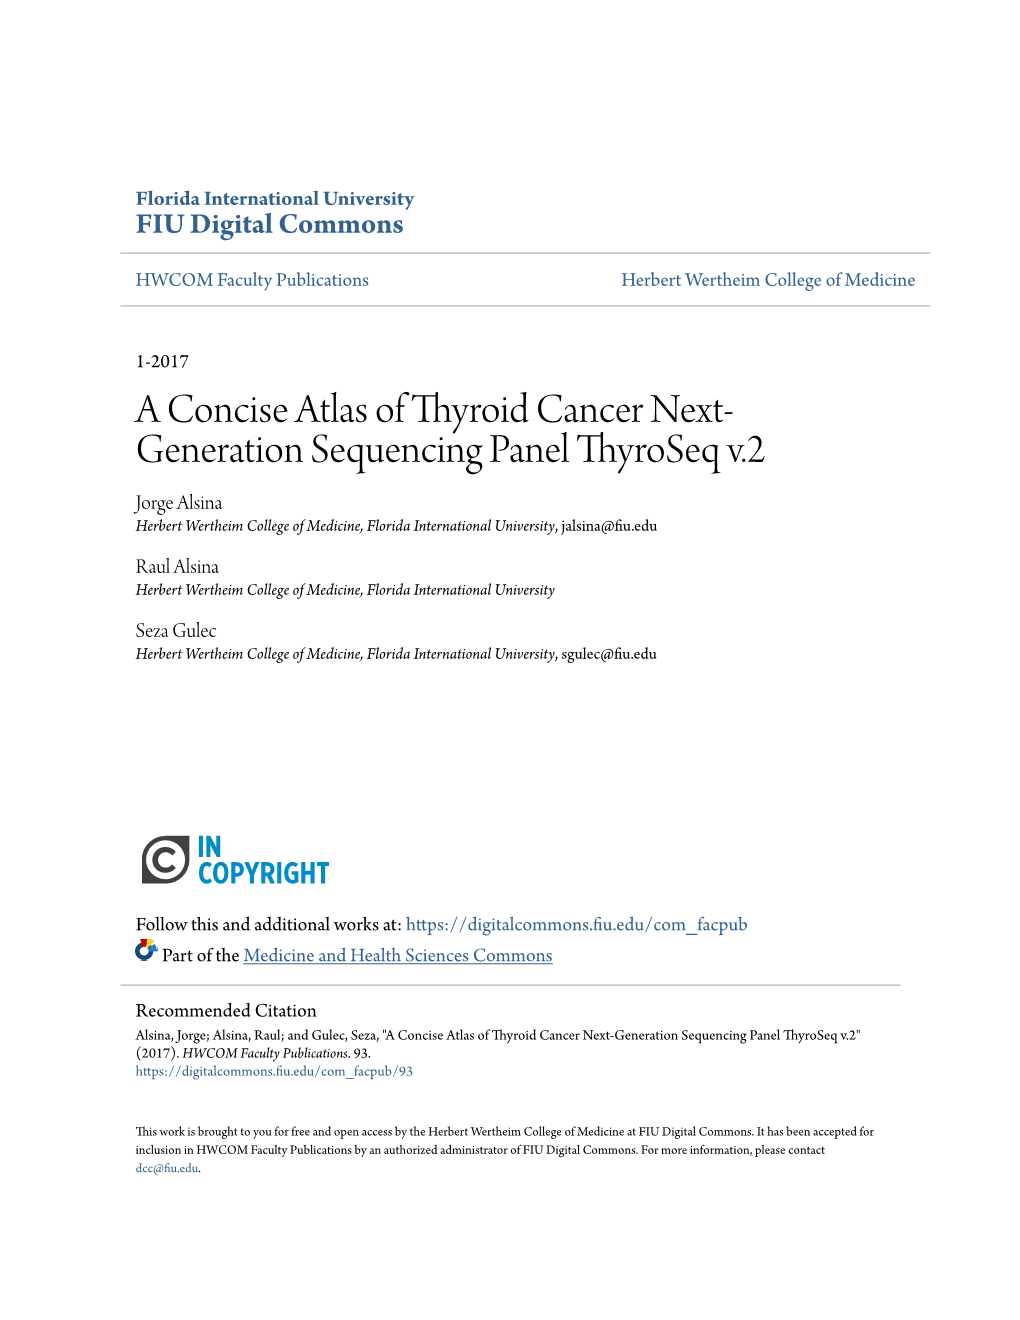 A Concise Atlas of Thyroid Cancer Next-Generation Sequencing Panel Thyroseq V.2" (2017)